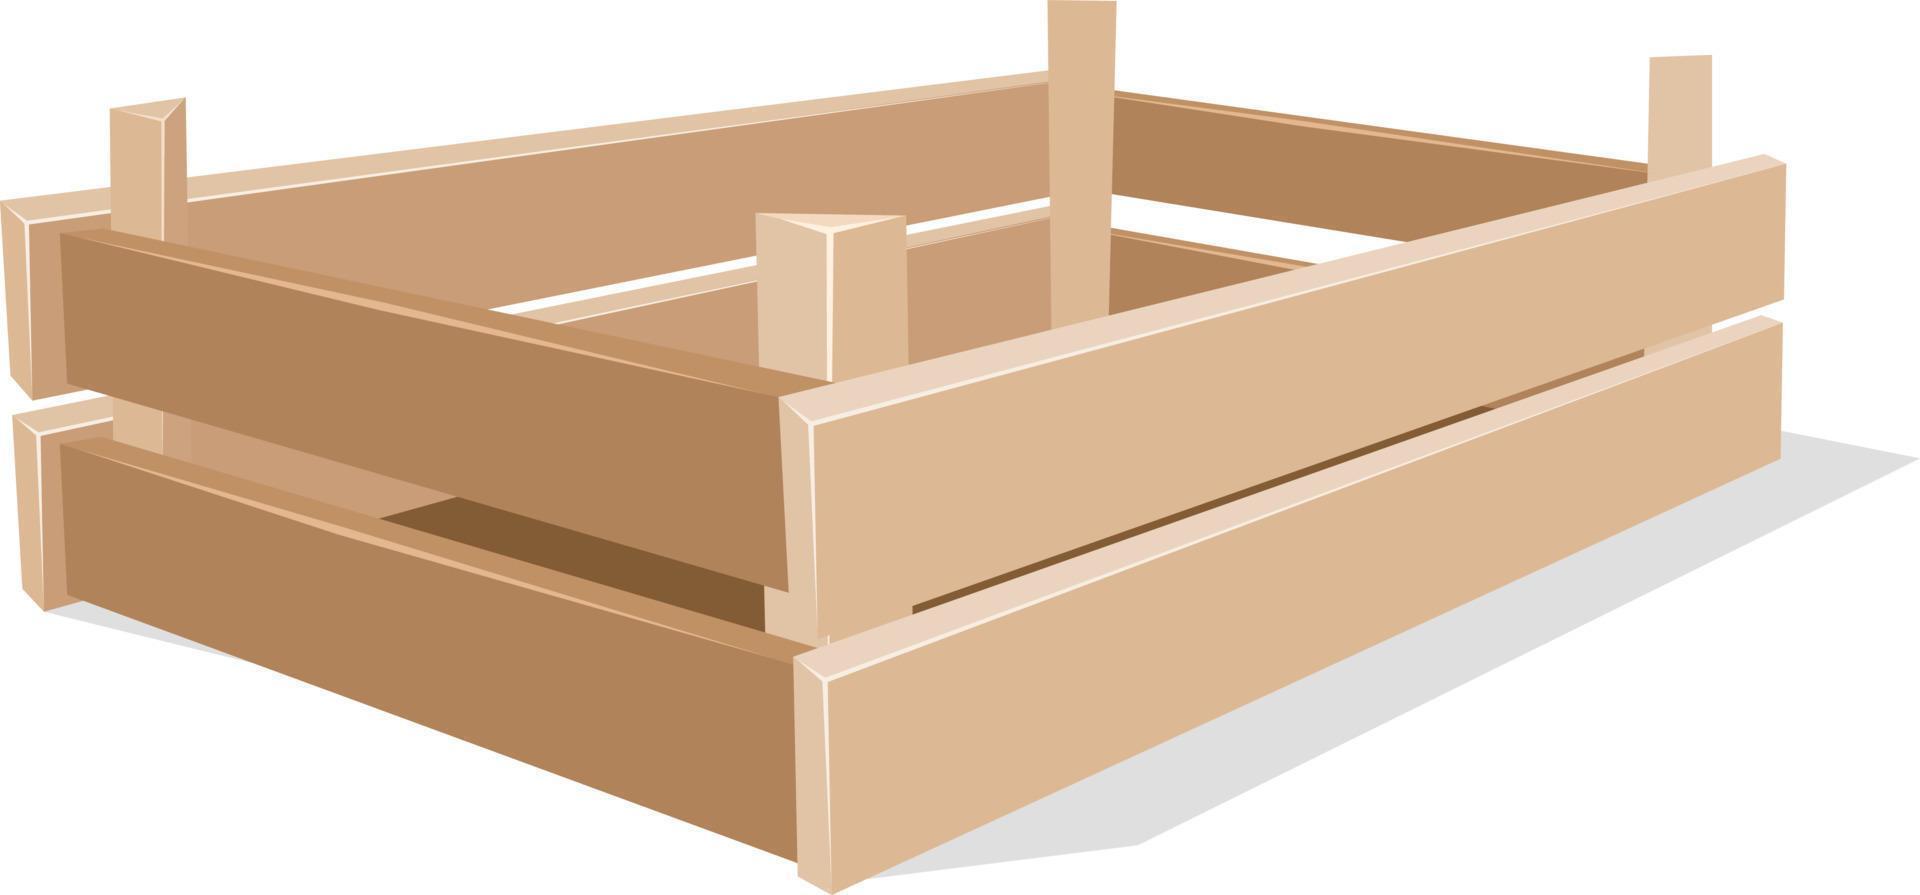 3D Vector Image Of A Wooden Box For Fruit And Vegetables